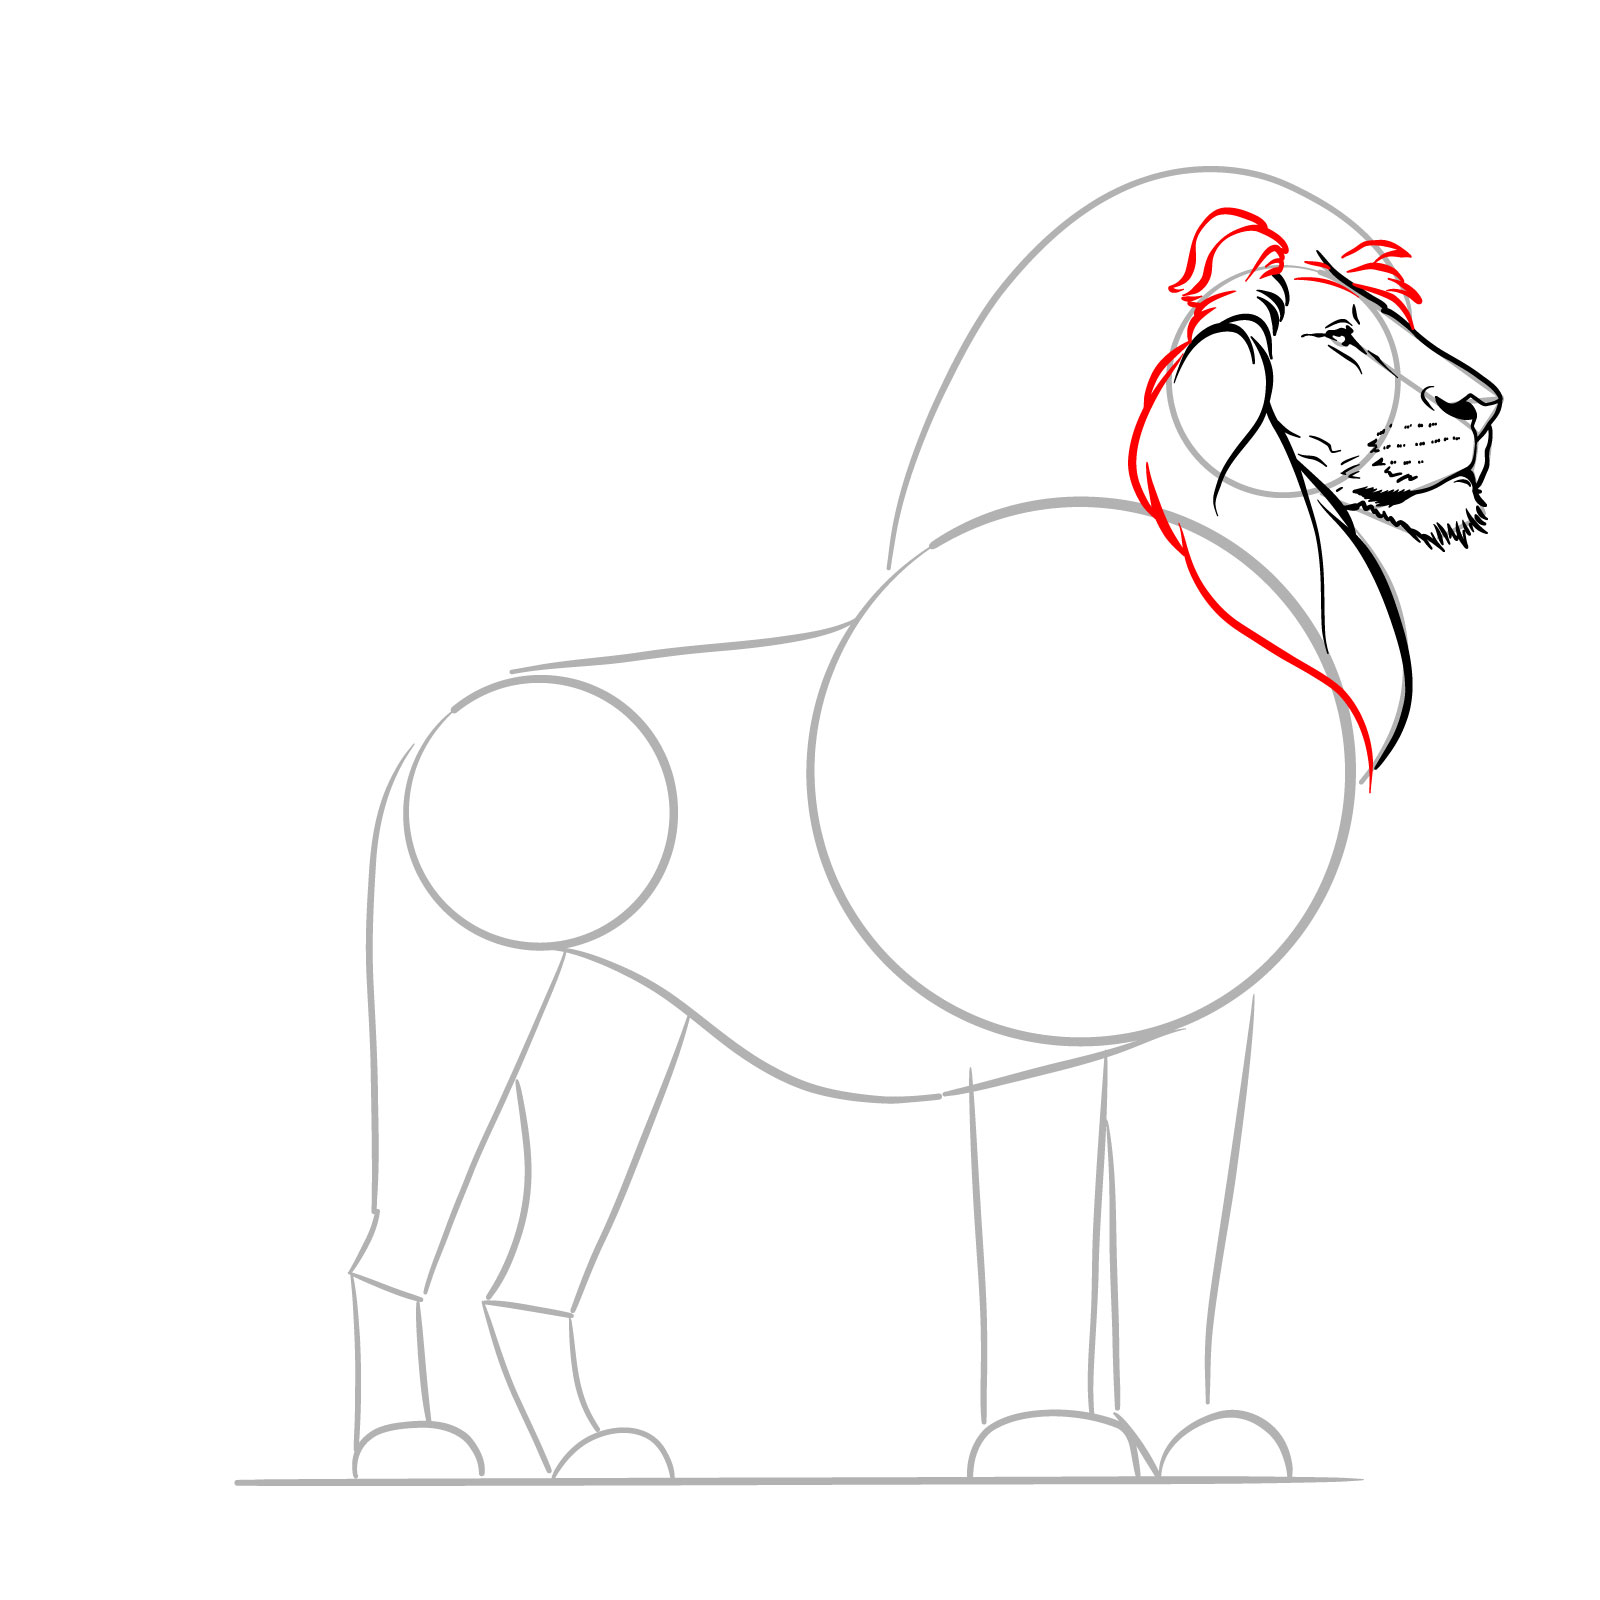 Enhancing the mane in a standing lion drawing instruction - step 09